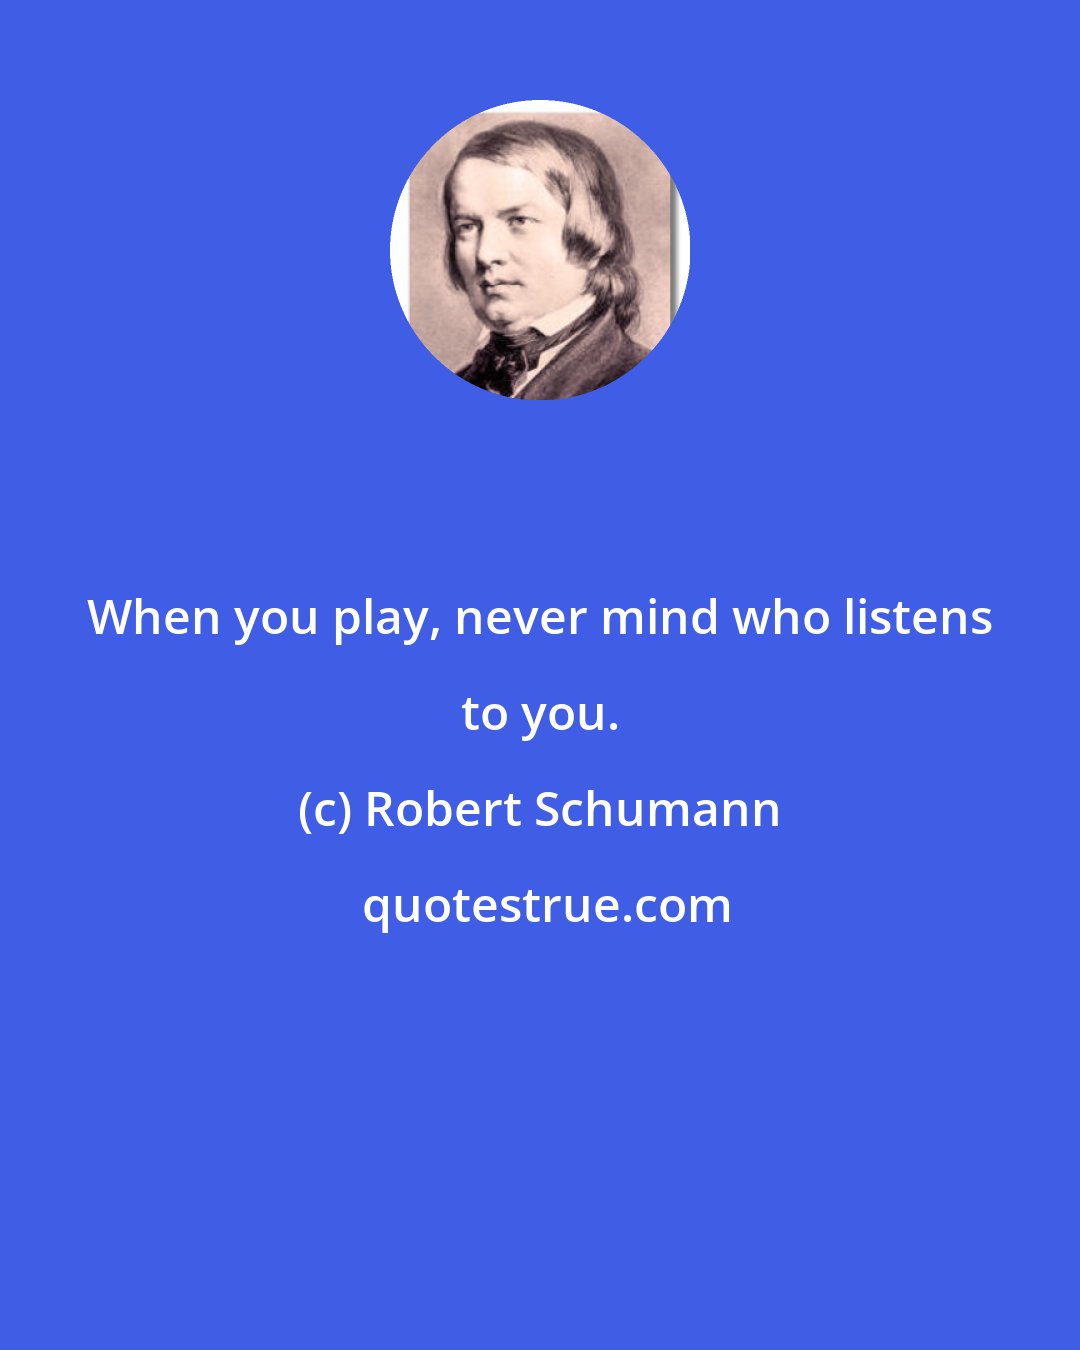 Robert Schumann: When you play, never mind who listens to you.